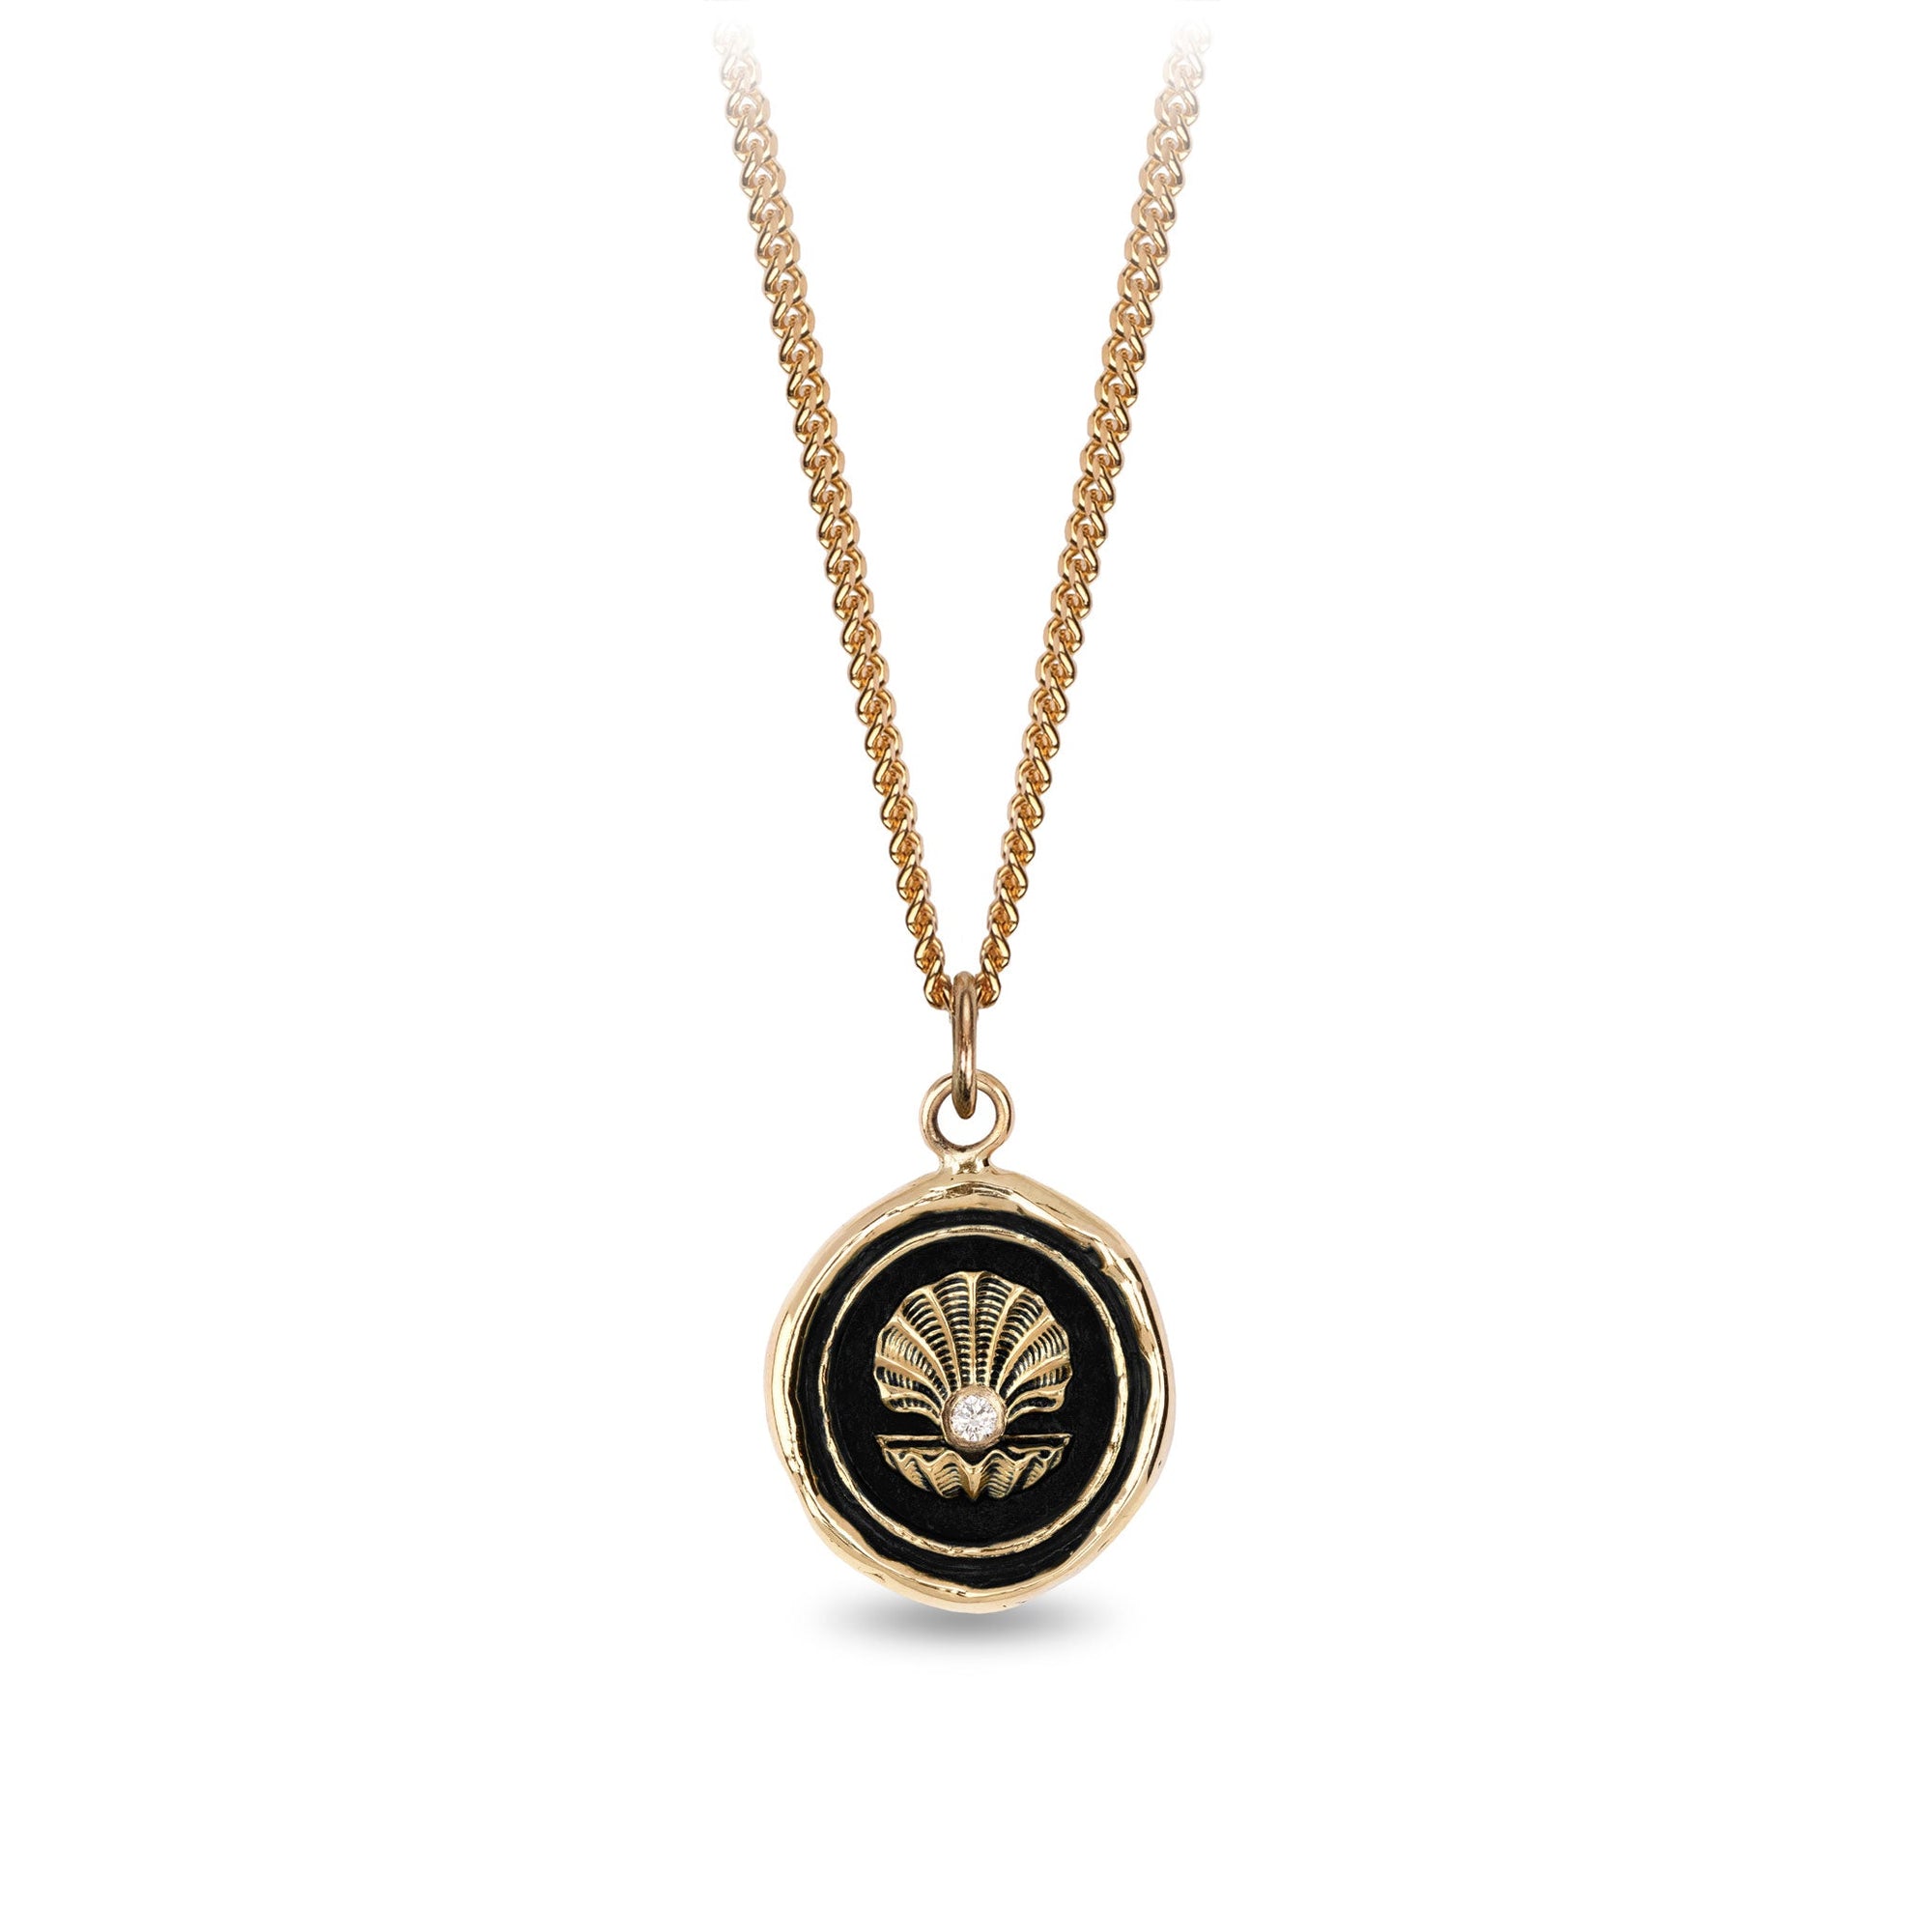 The World is Your Oyster 14K Gold Diamond Set Signature Talisman